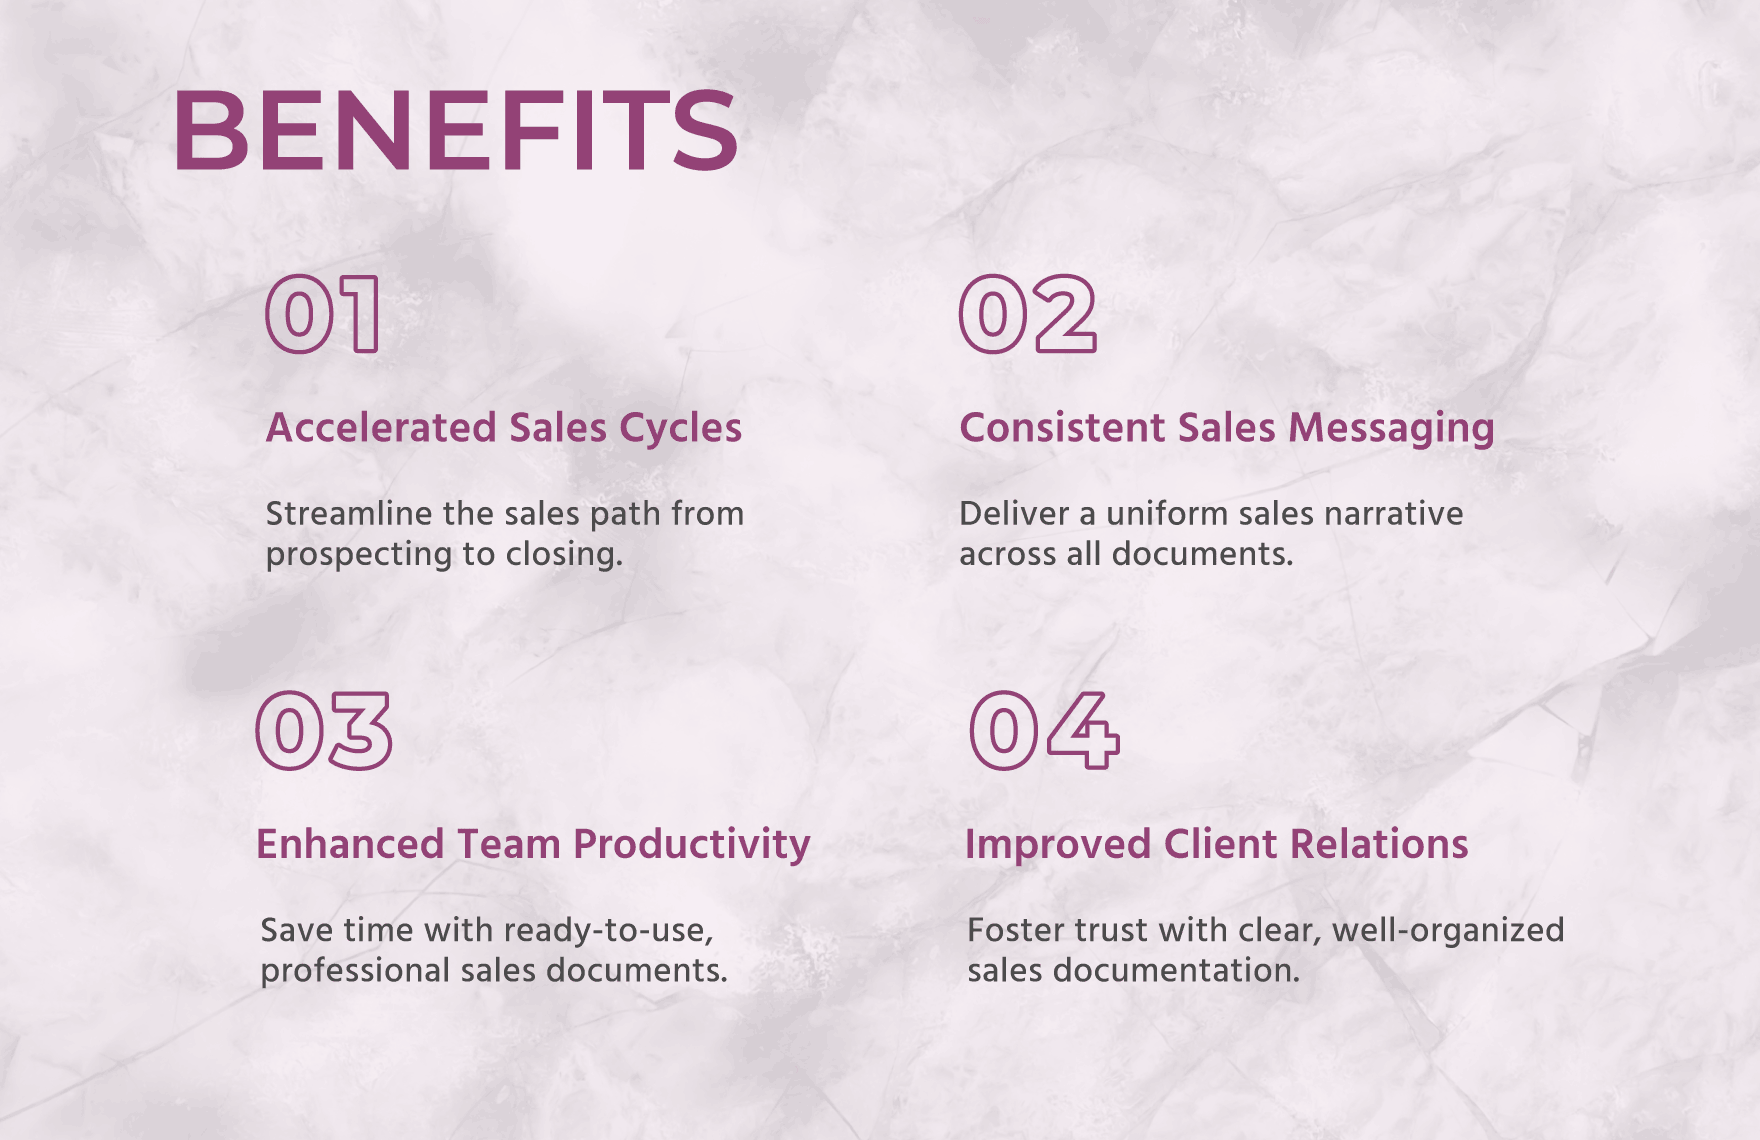 Sales Loyalty Points Statement Template